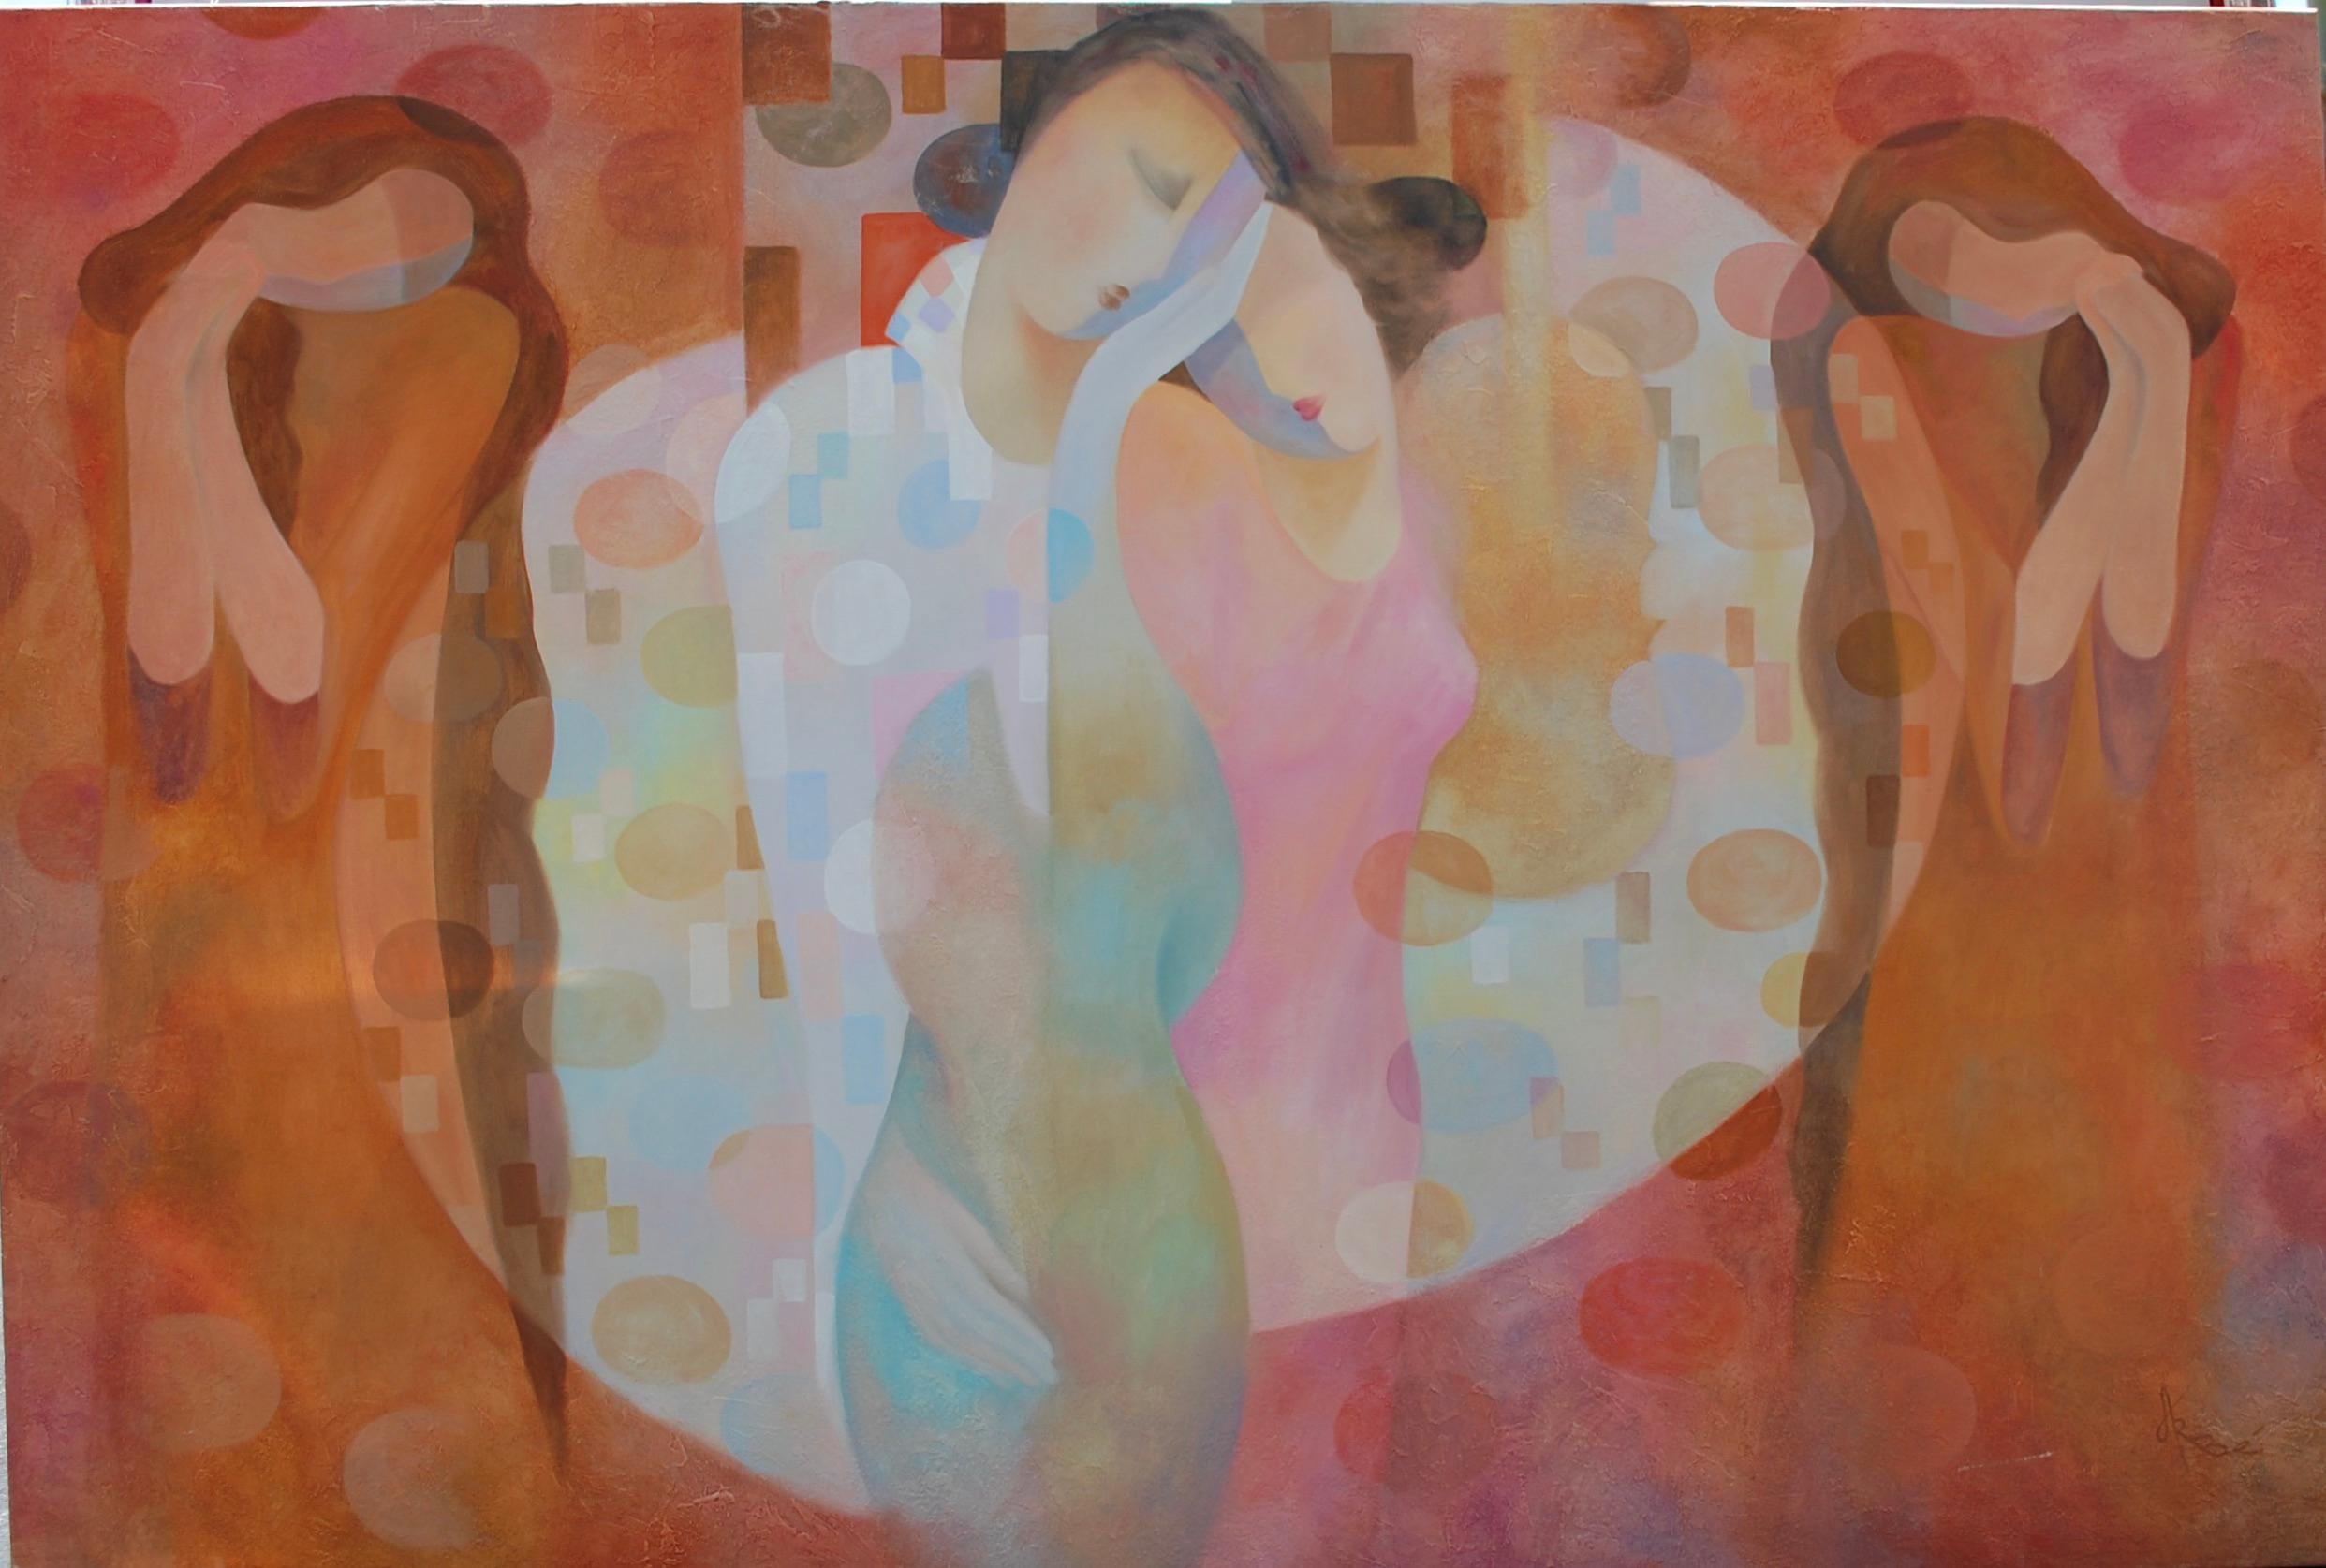 Arbe Ara Berberyan Figurative Painting - Engaged Large Figurative Abstract With Women